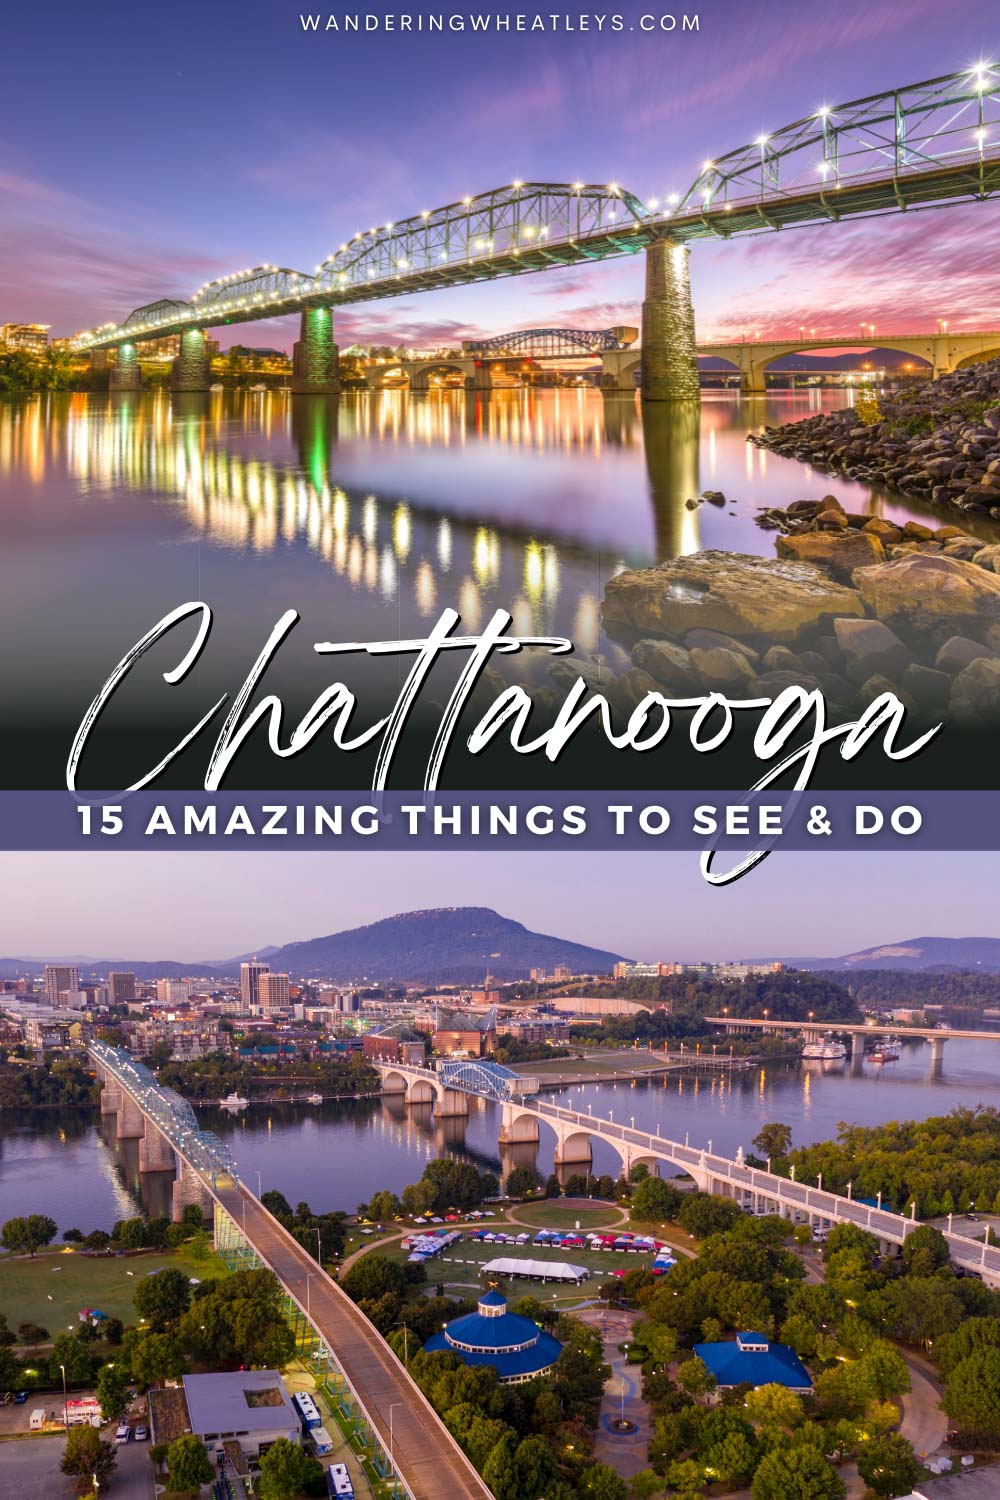 Best Things to do in Chattanooga, Tennessee